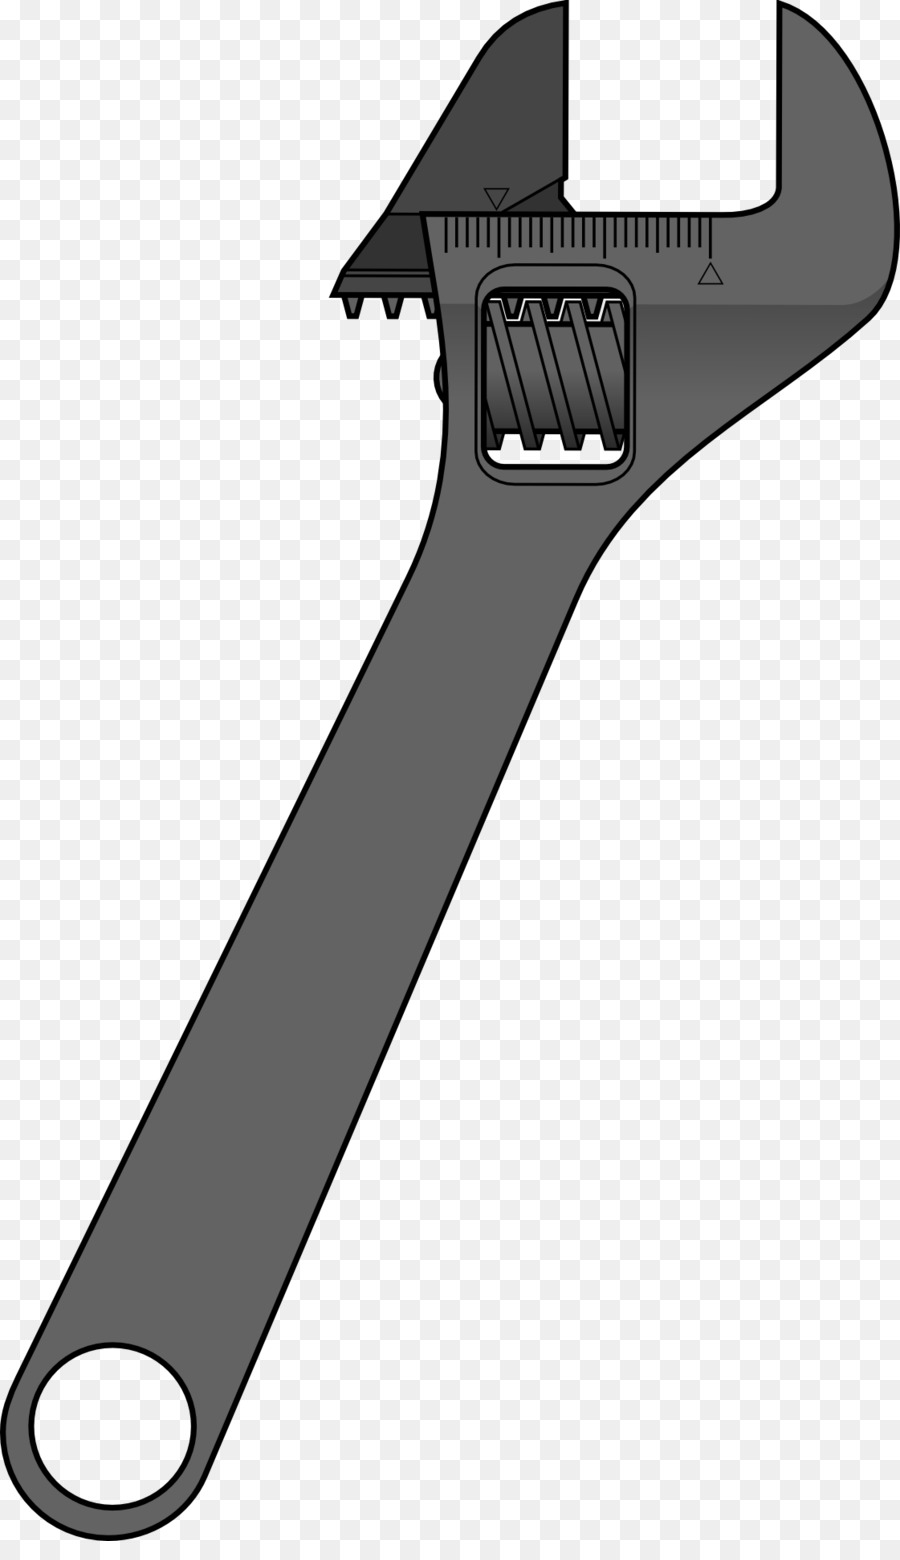 Spanners Adjustable spanner Pipe wrench Clip art - wrench png download - 1121*1920 - Free Transparent Spanners png Download.